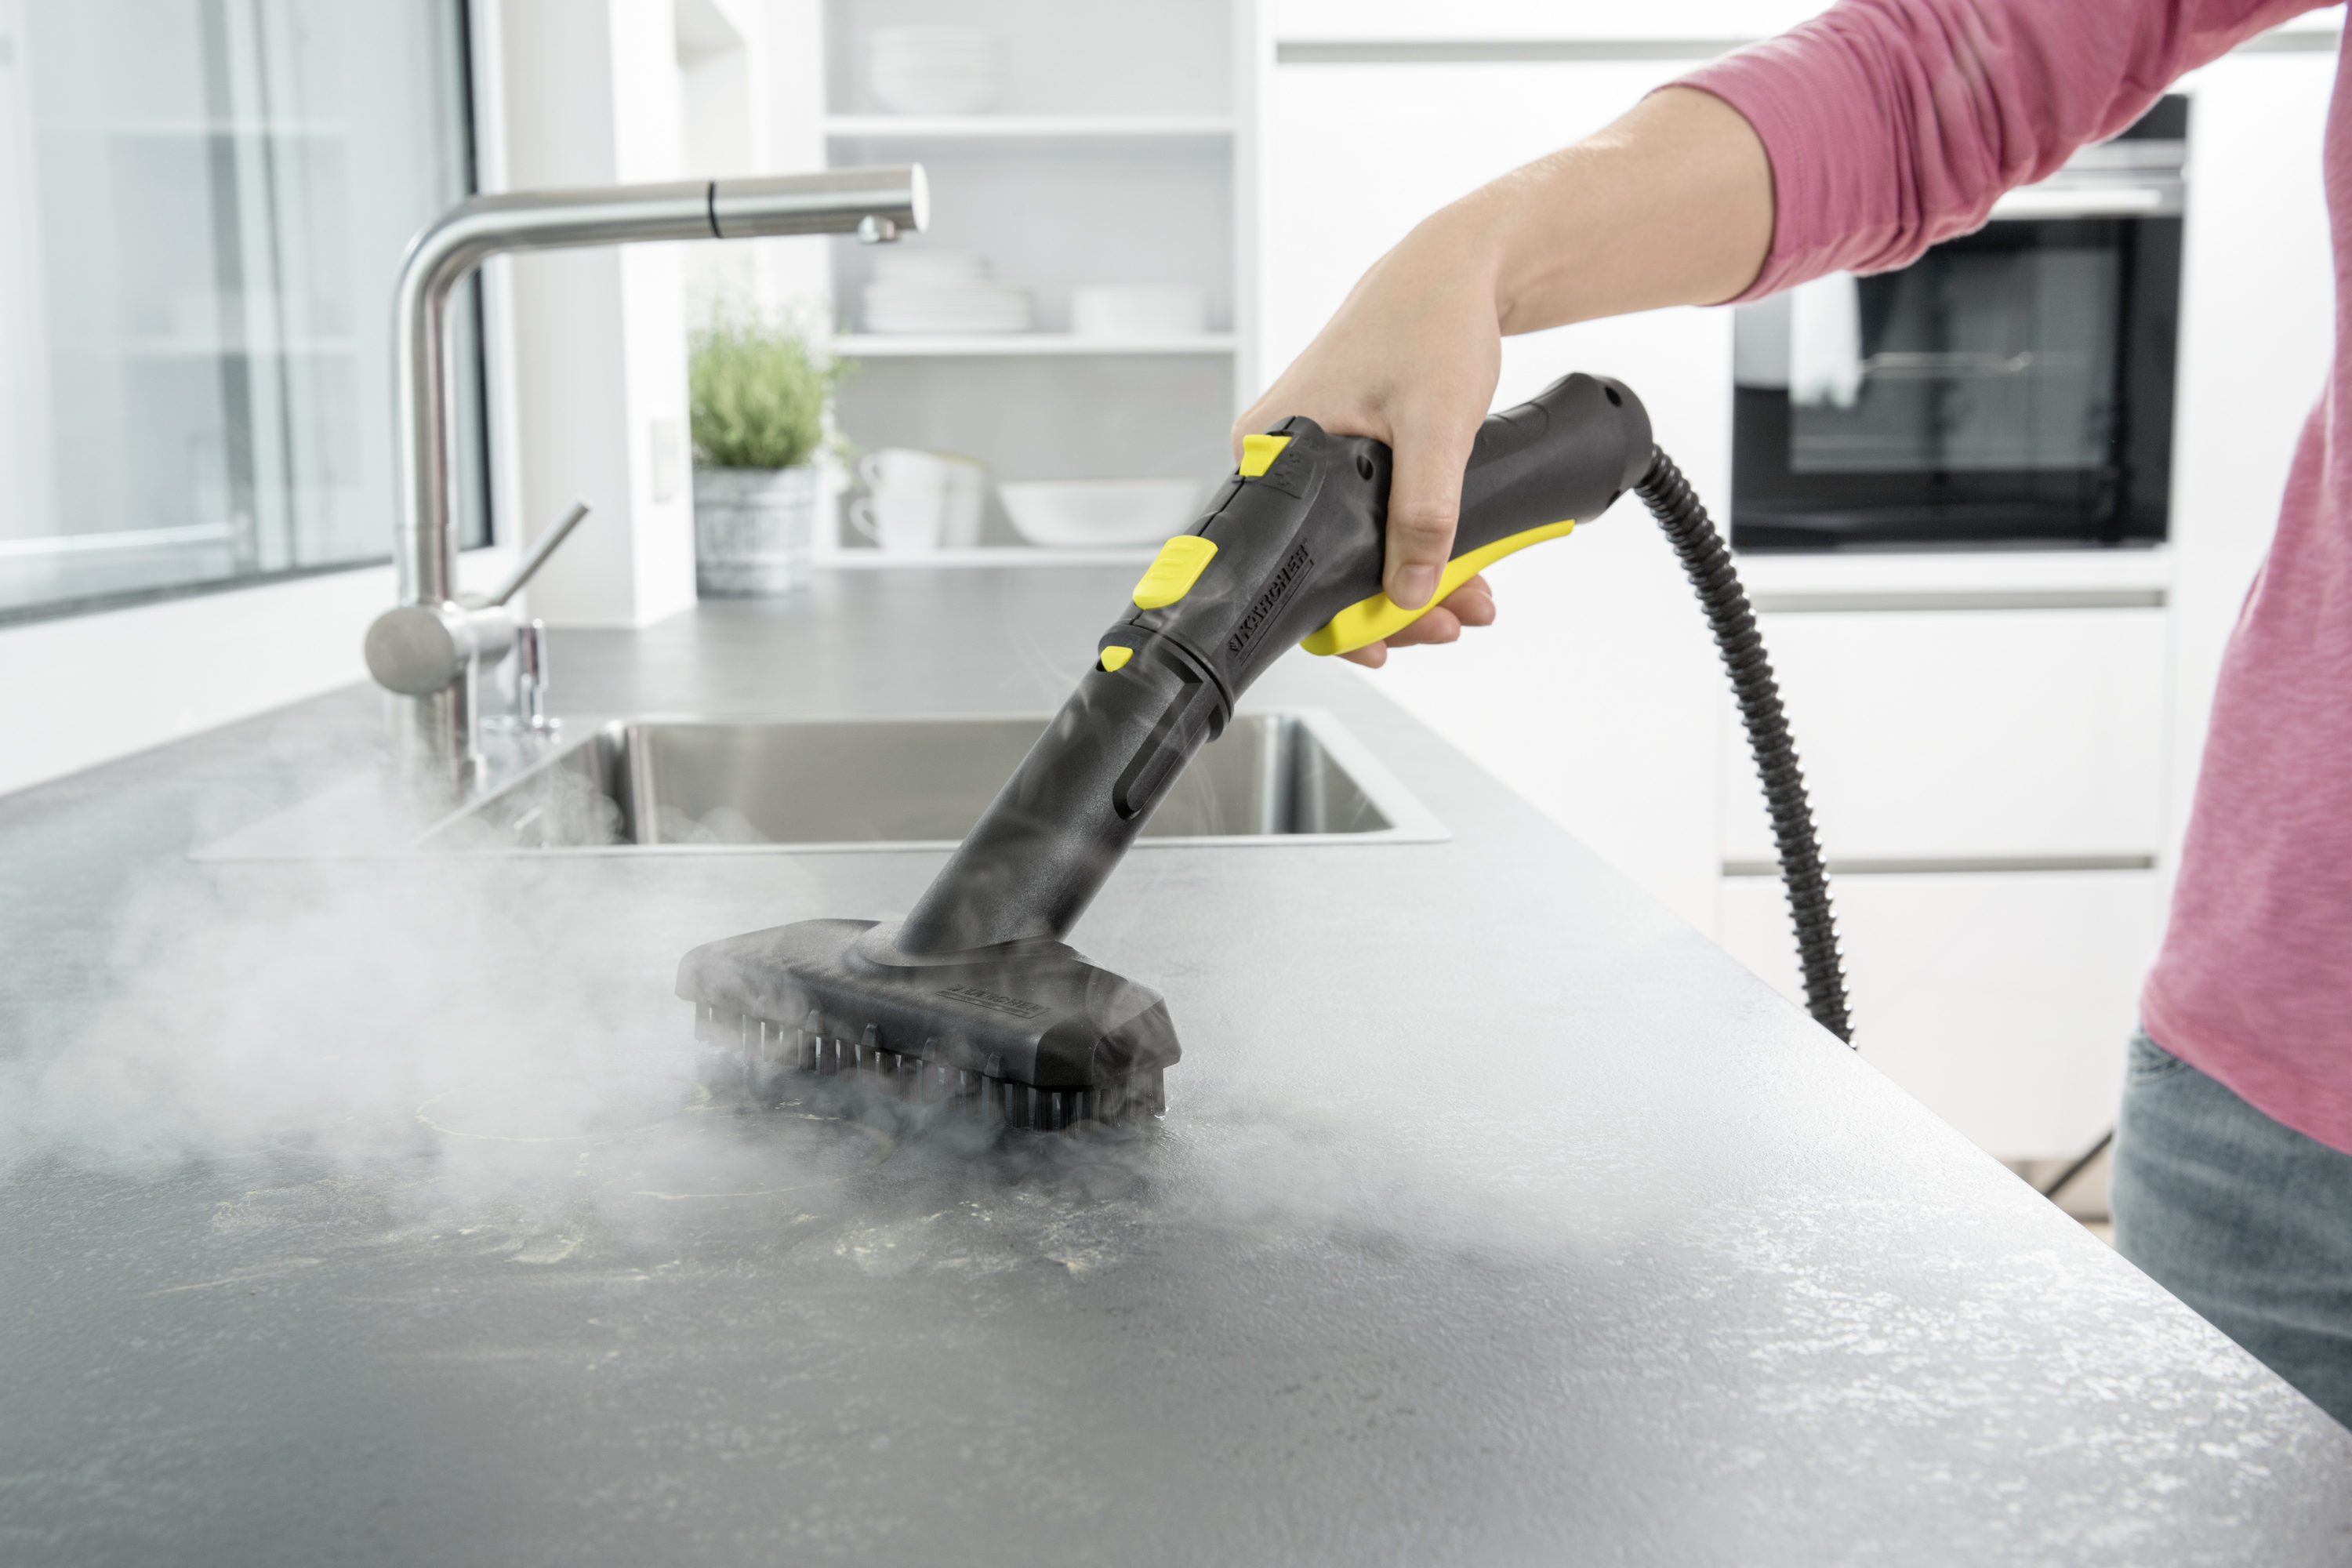 Details about   Karcher SC 3 EasyFix Steam Cleaner house cleaning open box mop used 